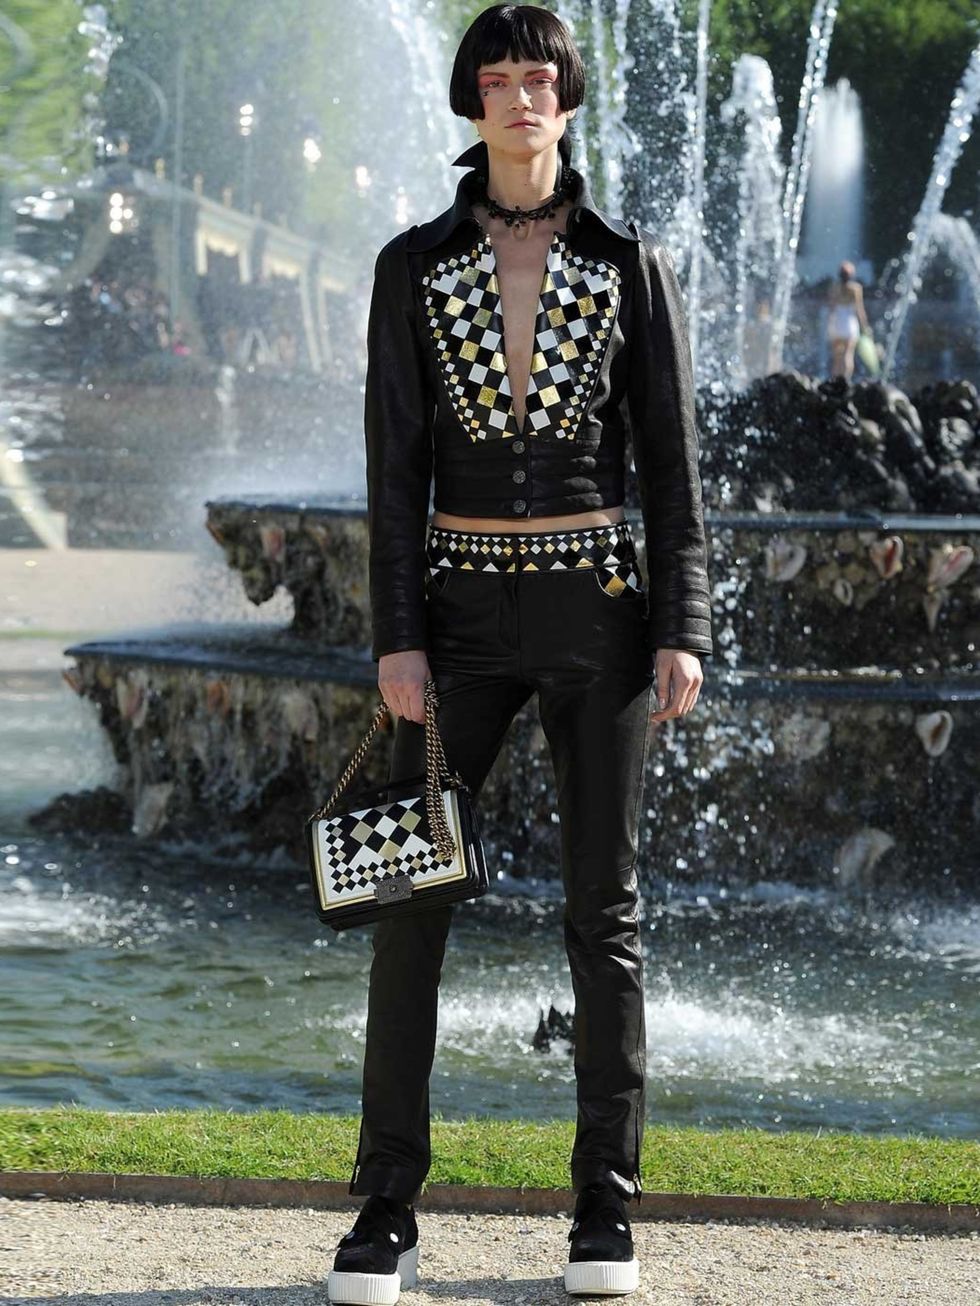 Chanel's Cruise 2013/2014 Collection[4]